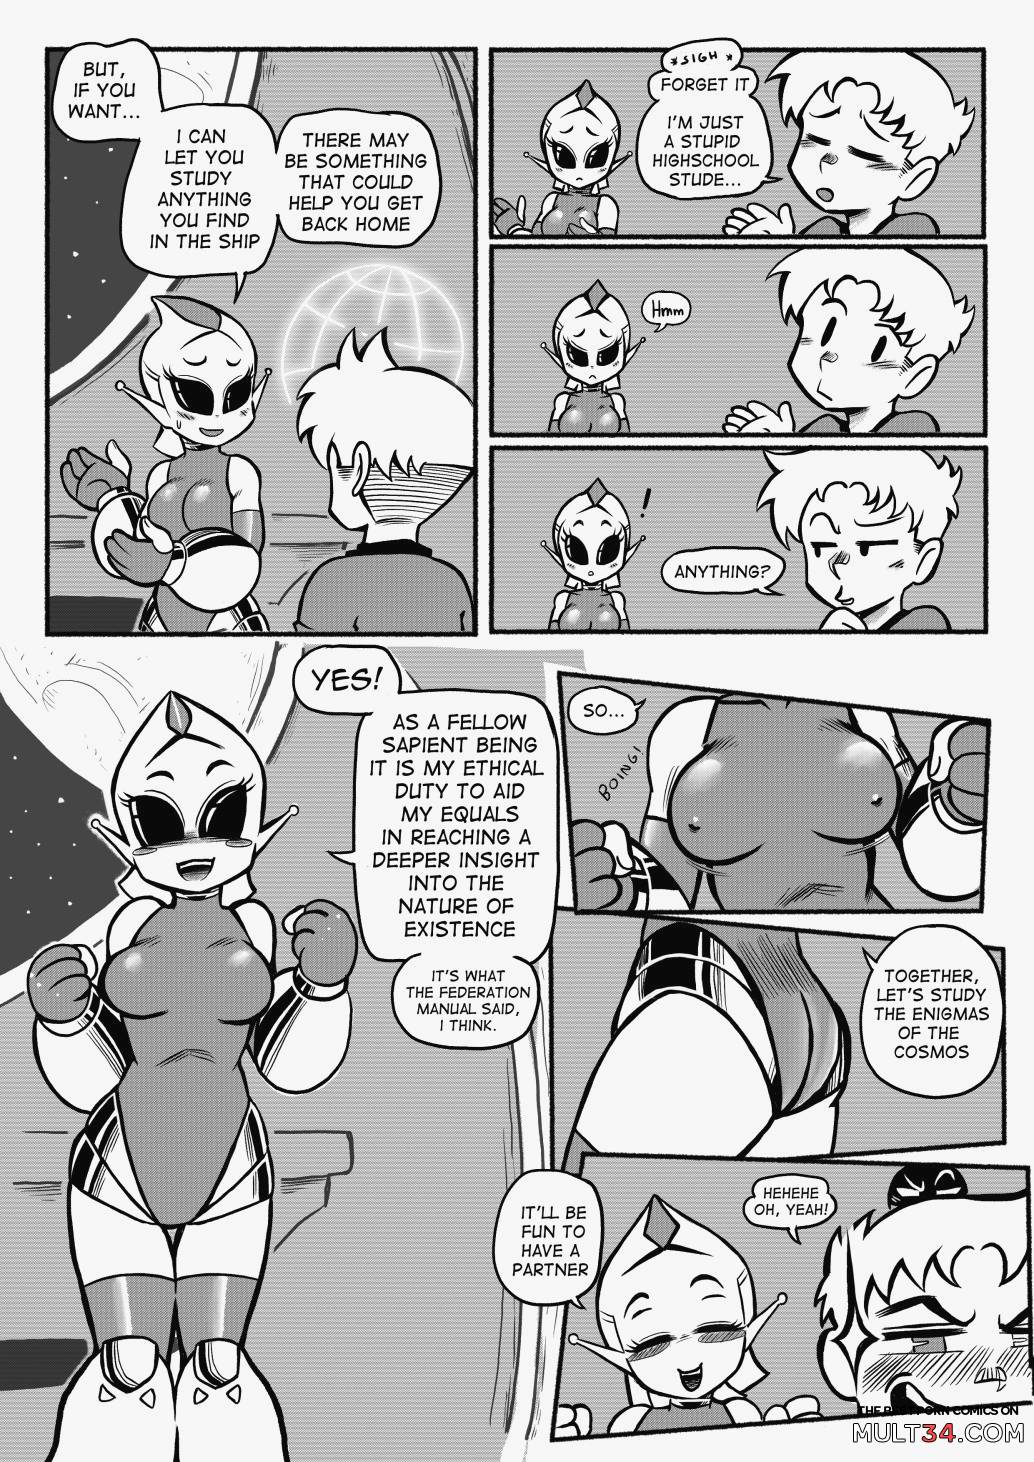 Abducted! - Mr.E page 11